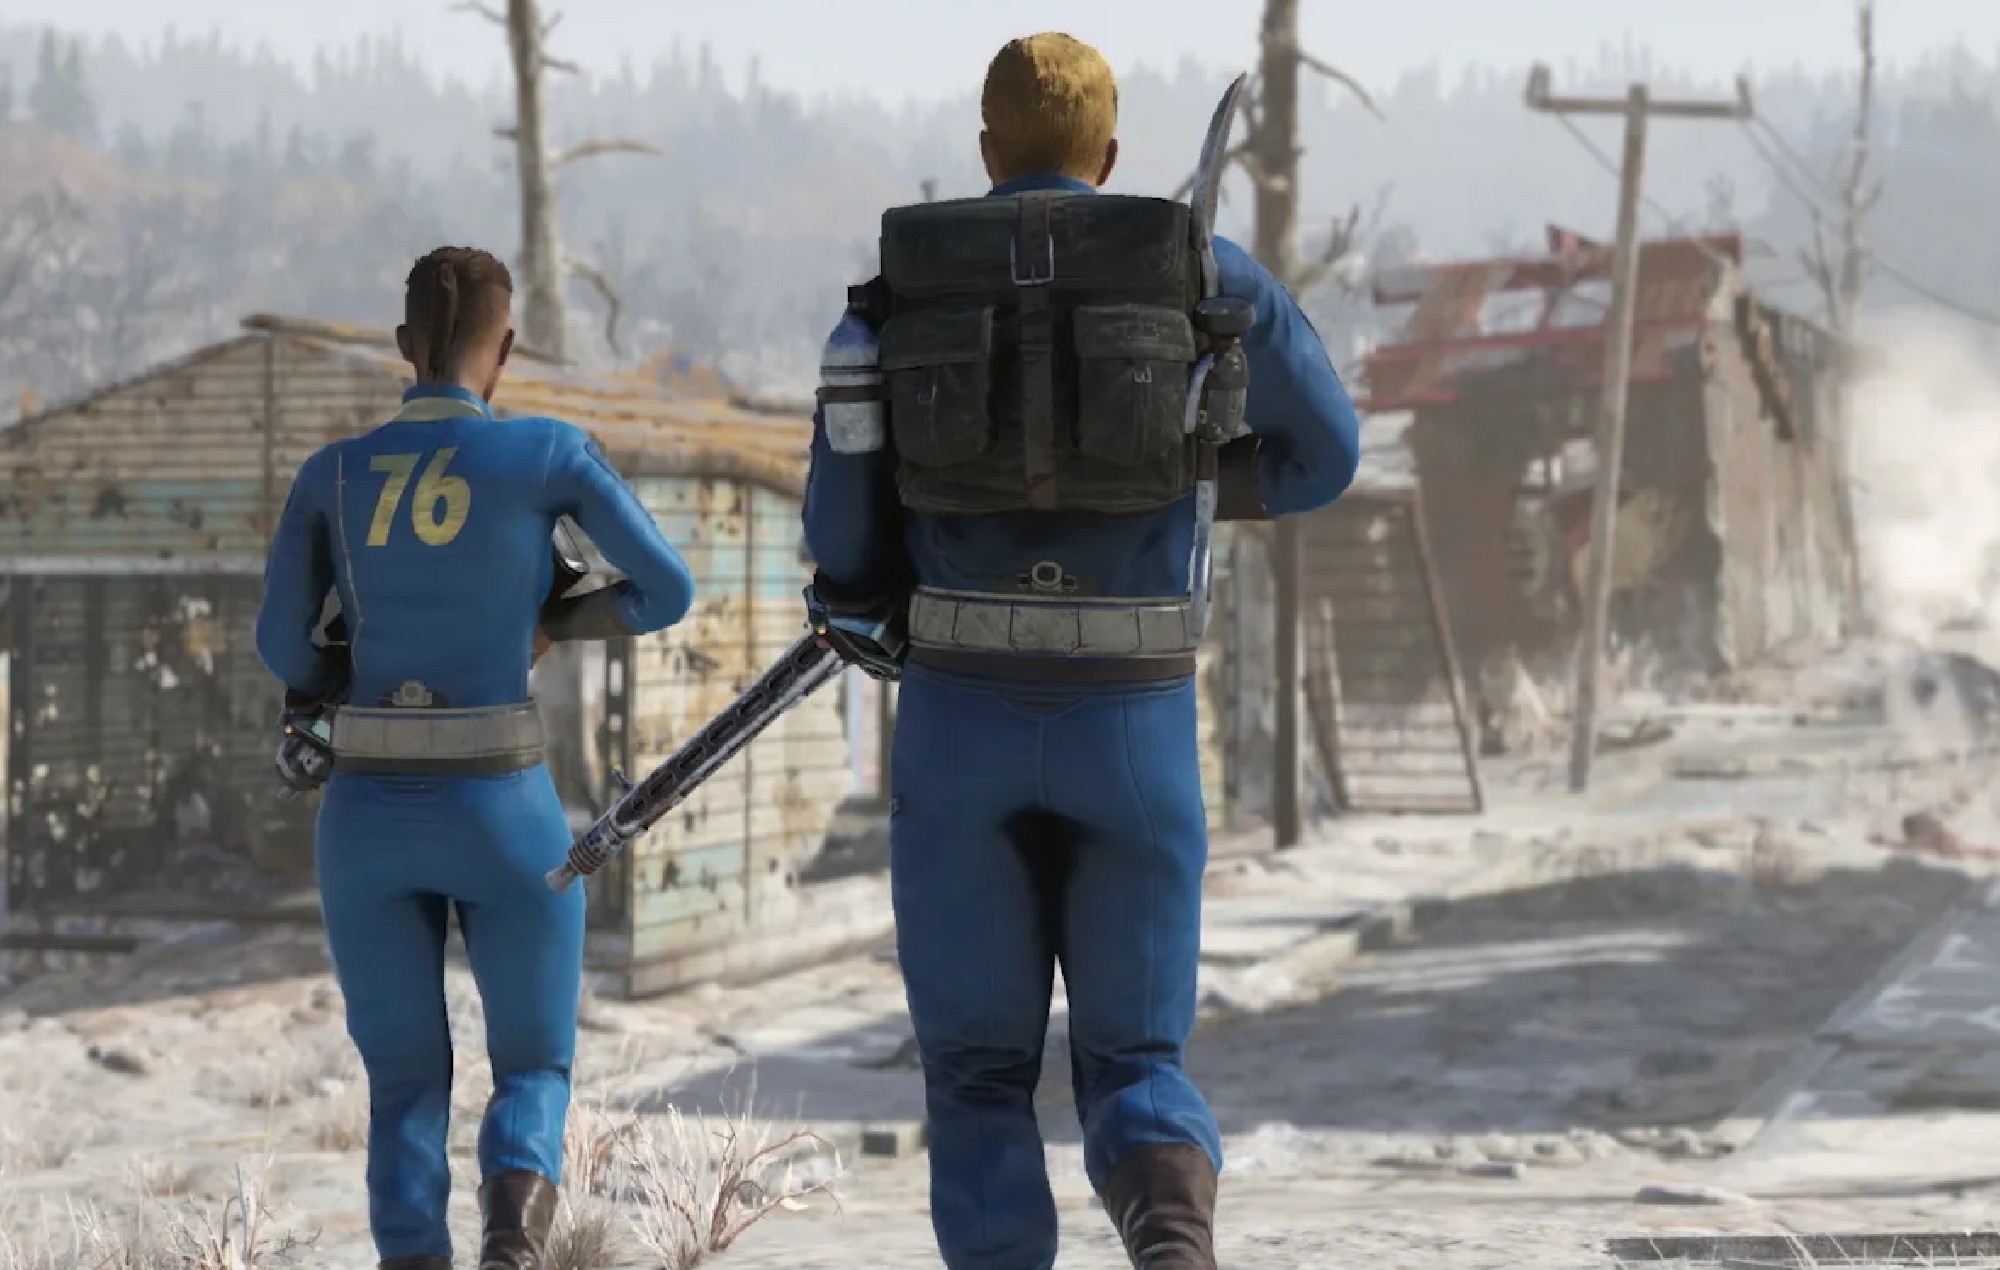 ‘Fallout 76’ was born out of “hubris”, says former Bethesda designer director